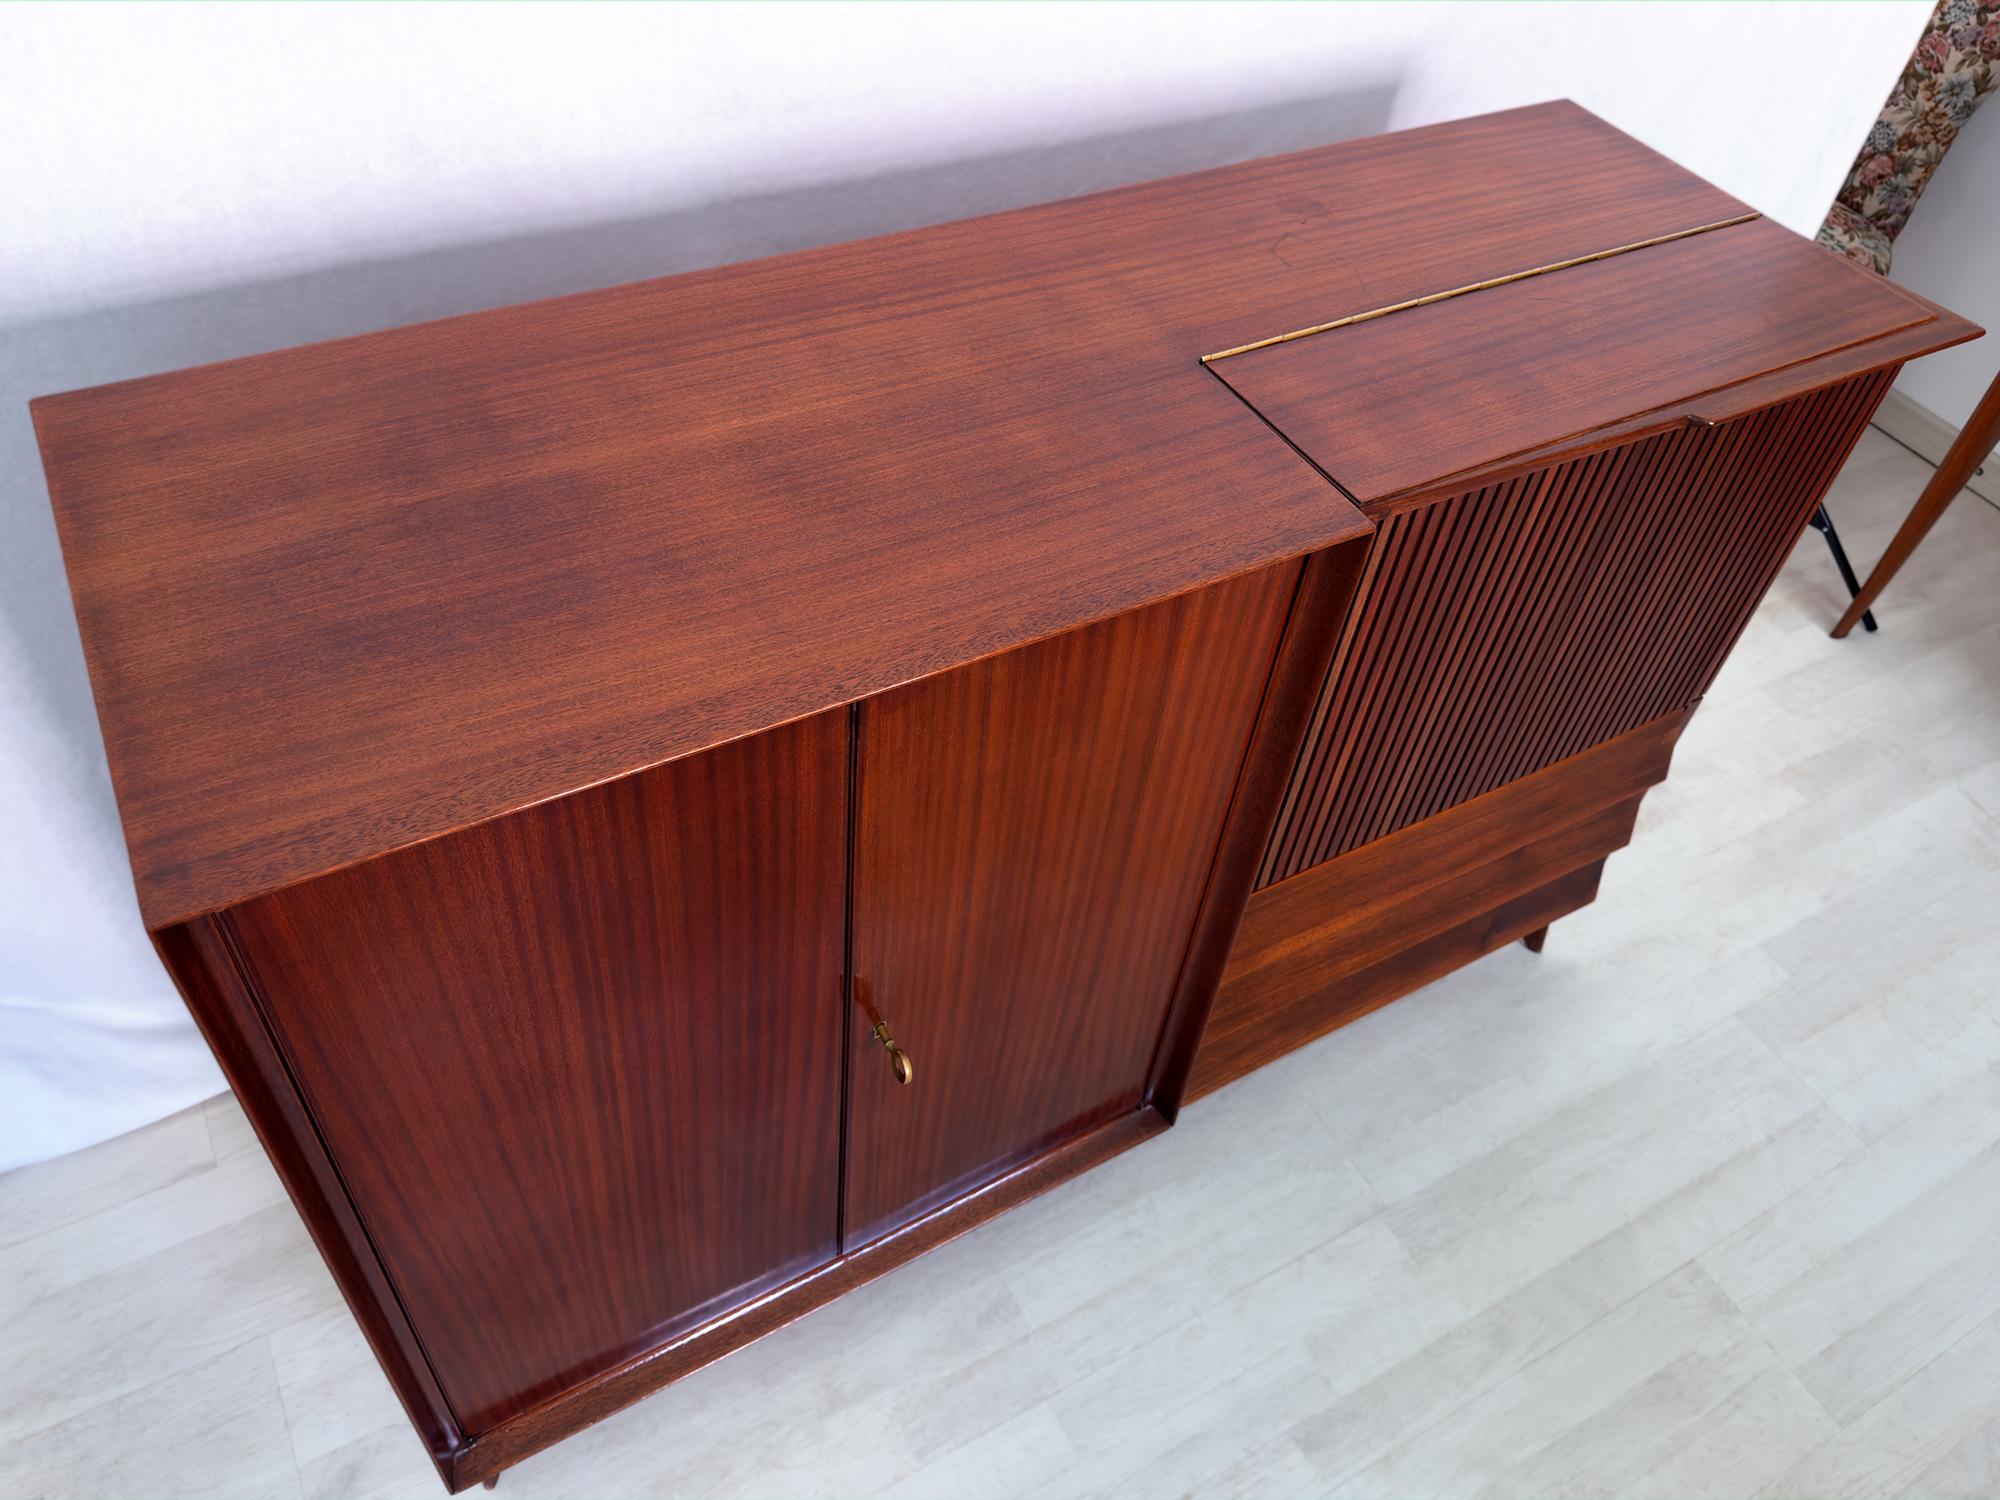 Italian Mid-Century Teak Wood Sideboard with Bar Cabinet by Vittorio Dassi, 1950s For Sale 14